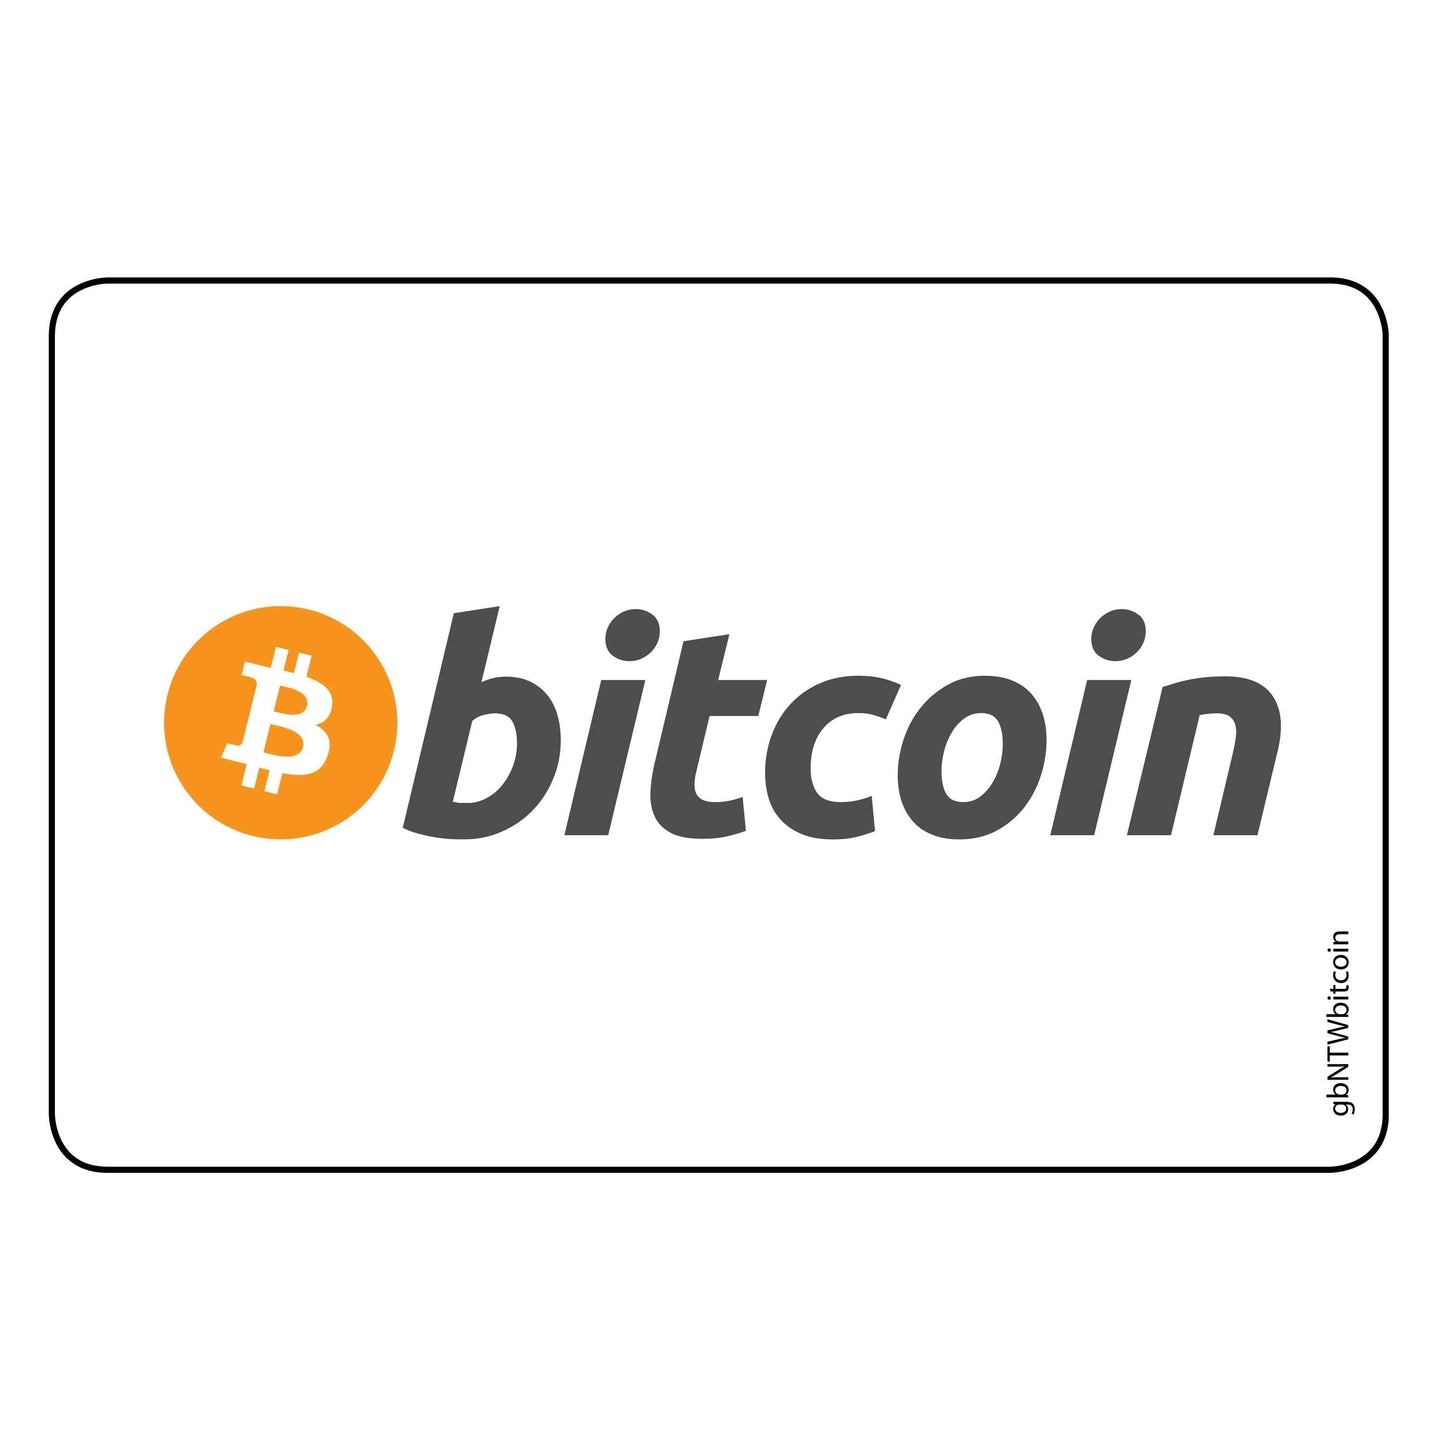 Single Network Decal, Bitcoin Decal. 3 inches by 2 inches in size.